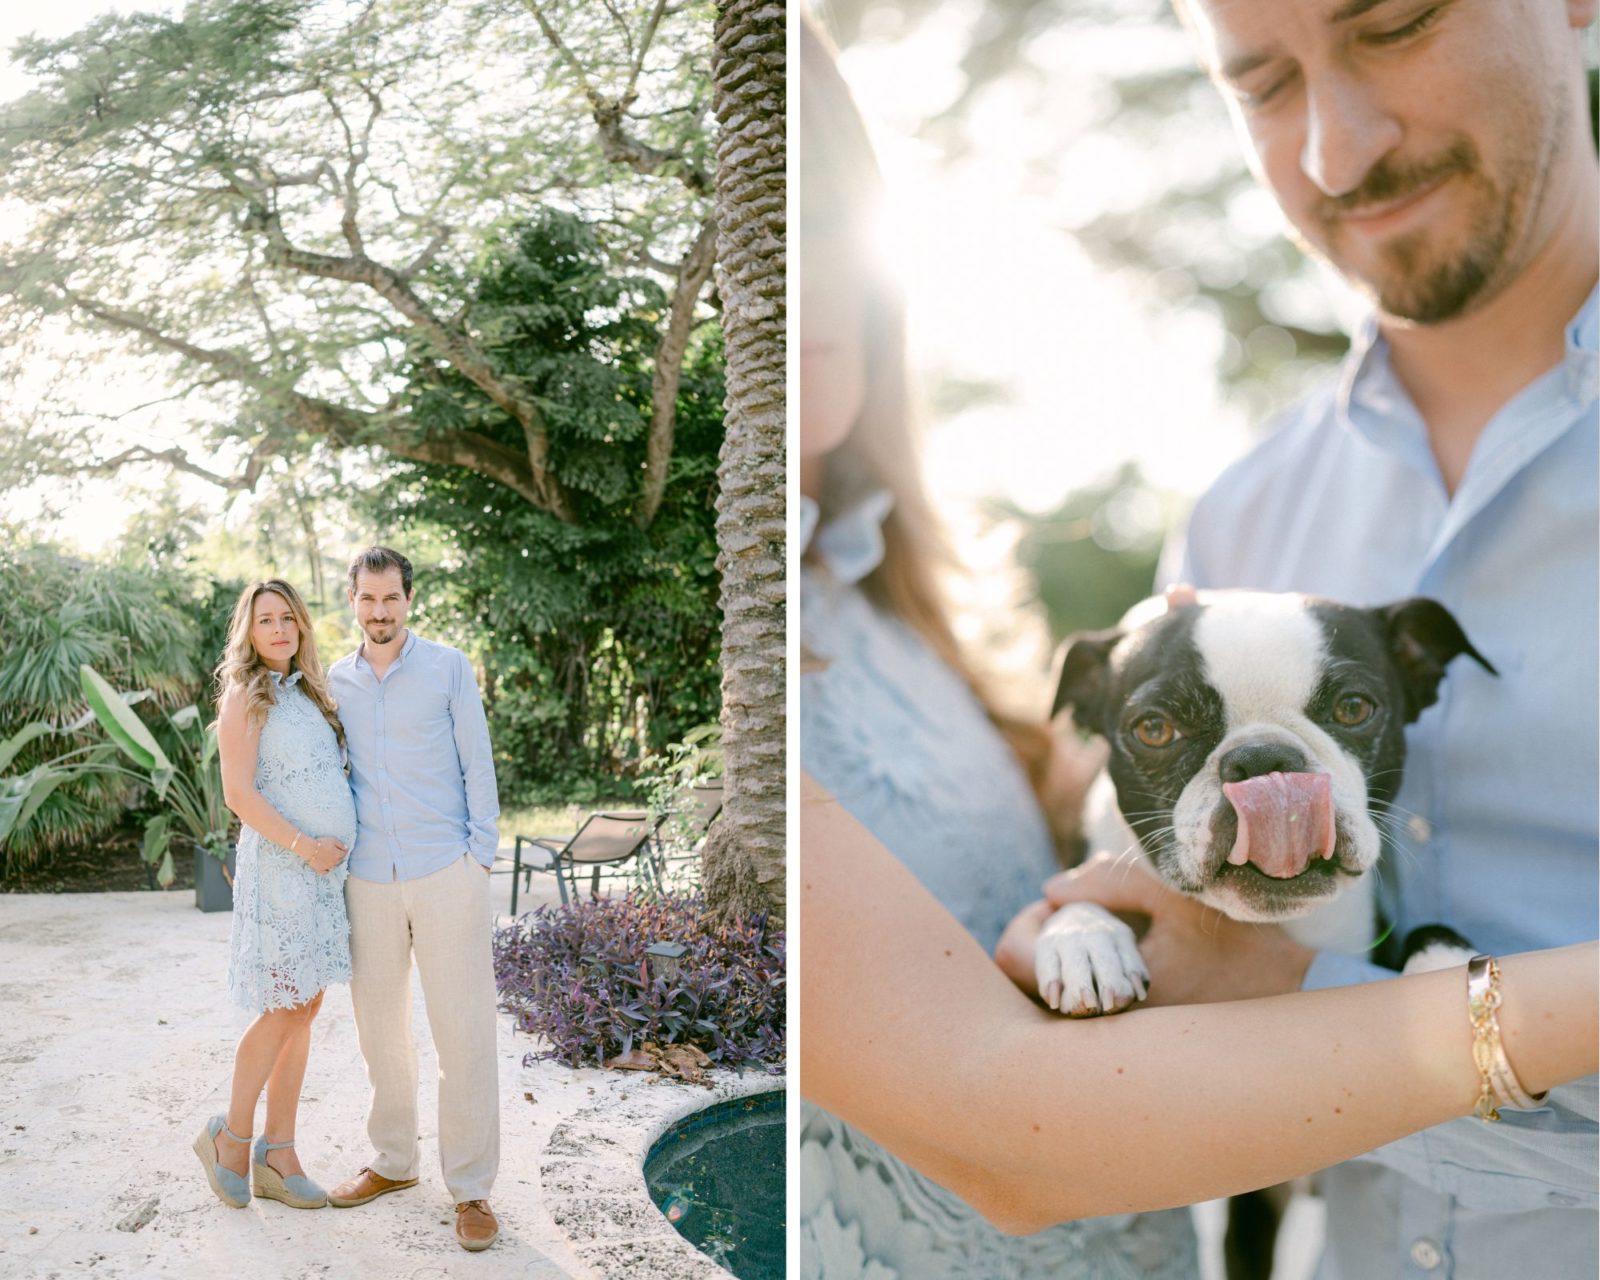 At home maternity photos with dog | Coral Gables